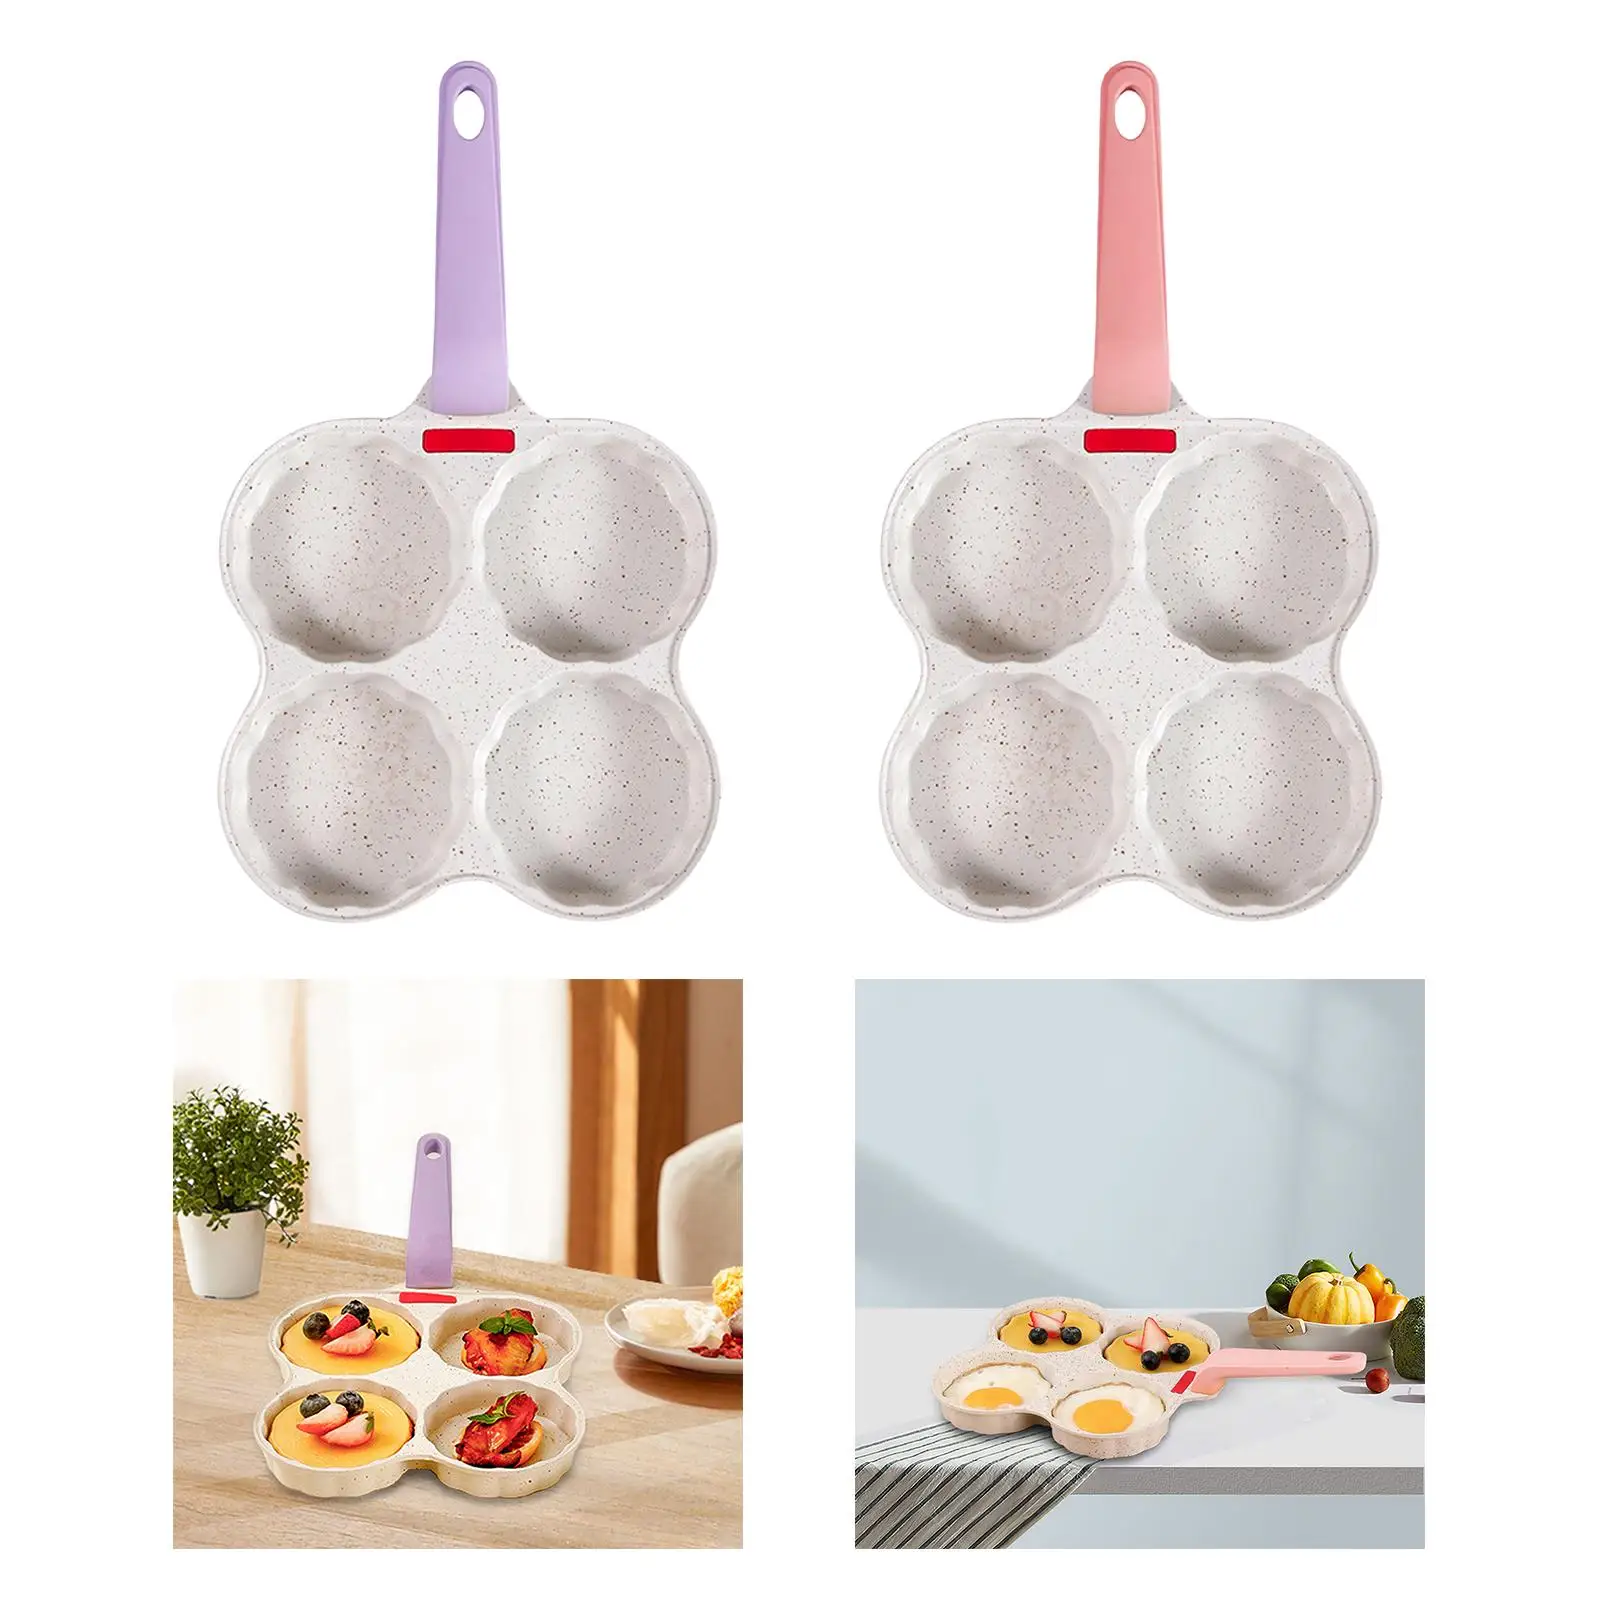 Egg Frying Pan Cooking Ham Muffins 4 Cups with Handle Crepe Pan Egg Skillet Breakfast Frying Pan Gas Stove Kitchen Supplies